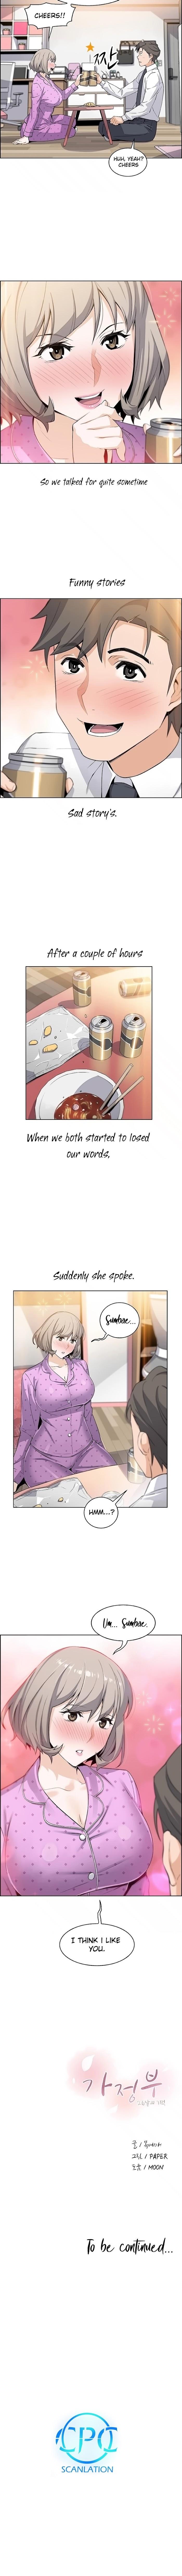 Housekeeper [Neck Pillow, Paper] Ch.49/49 [English] [Manhwa PDF] Completed 168